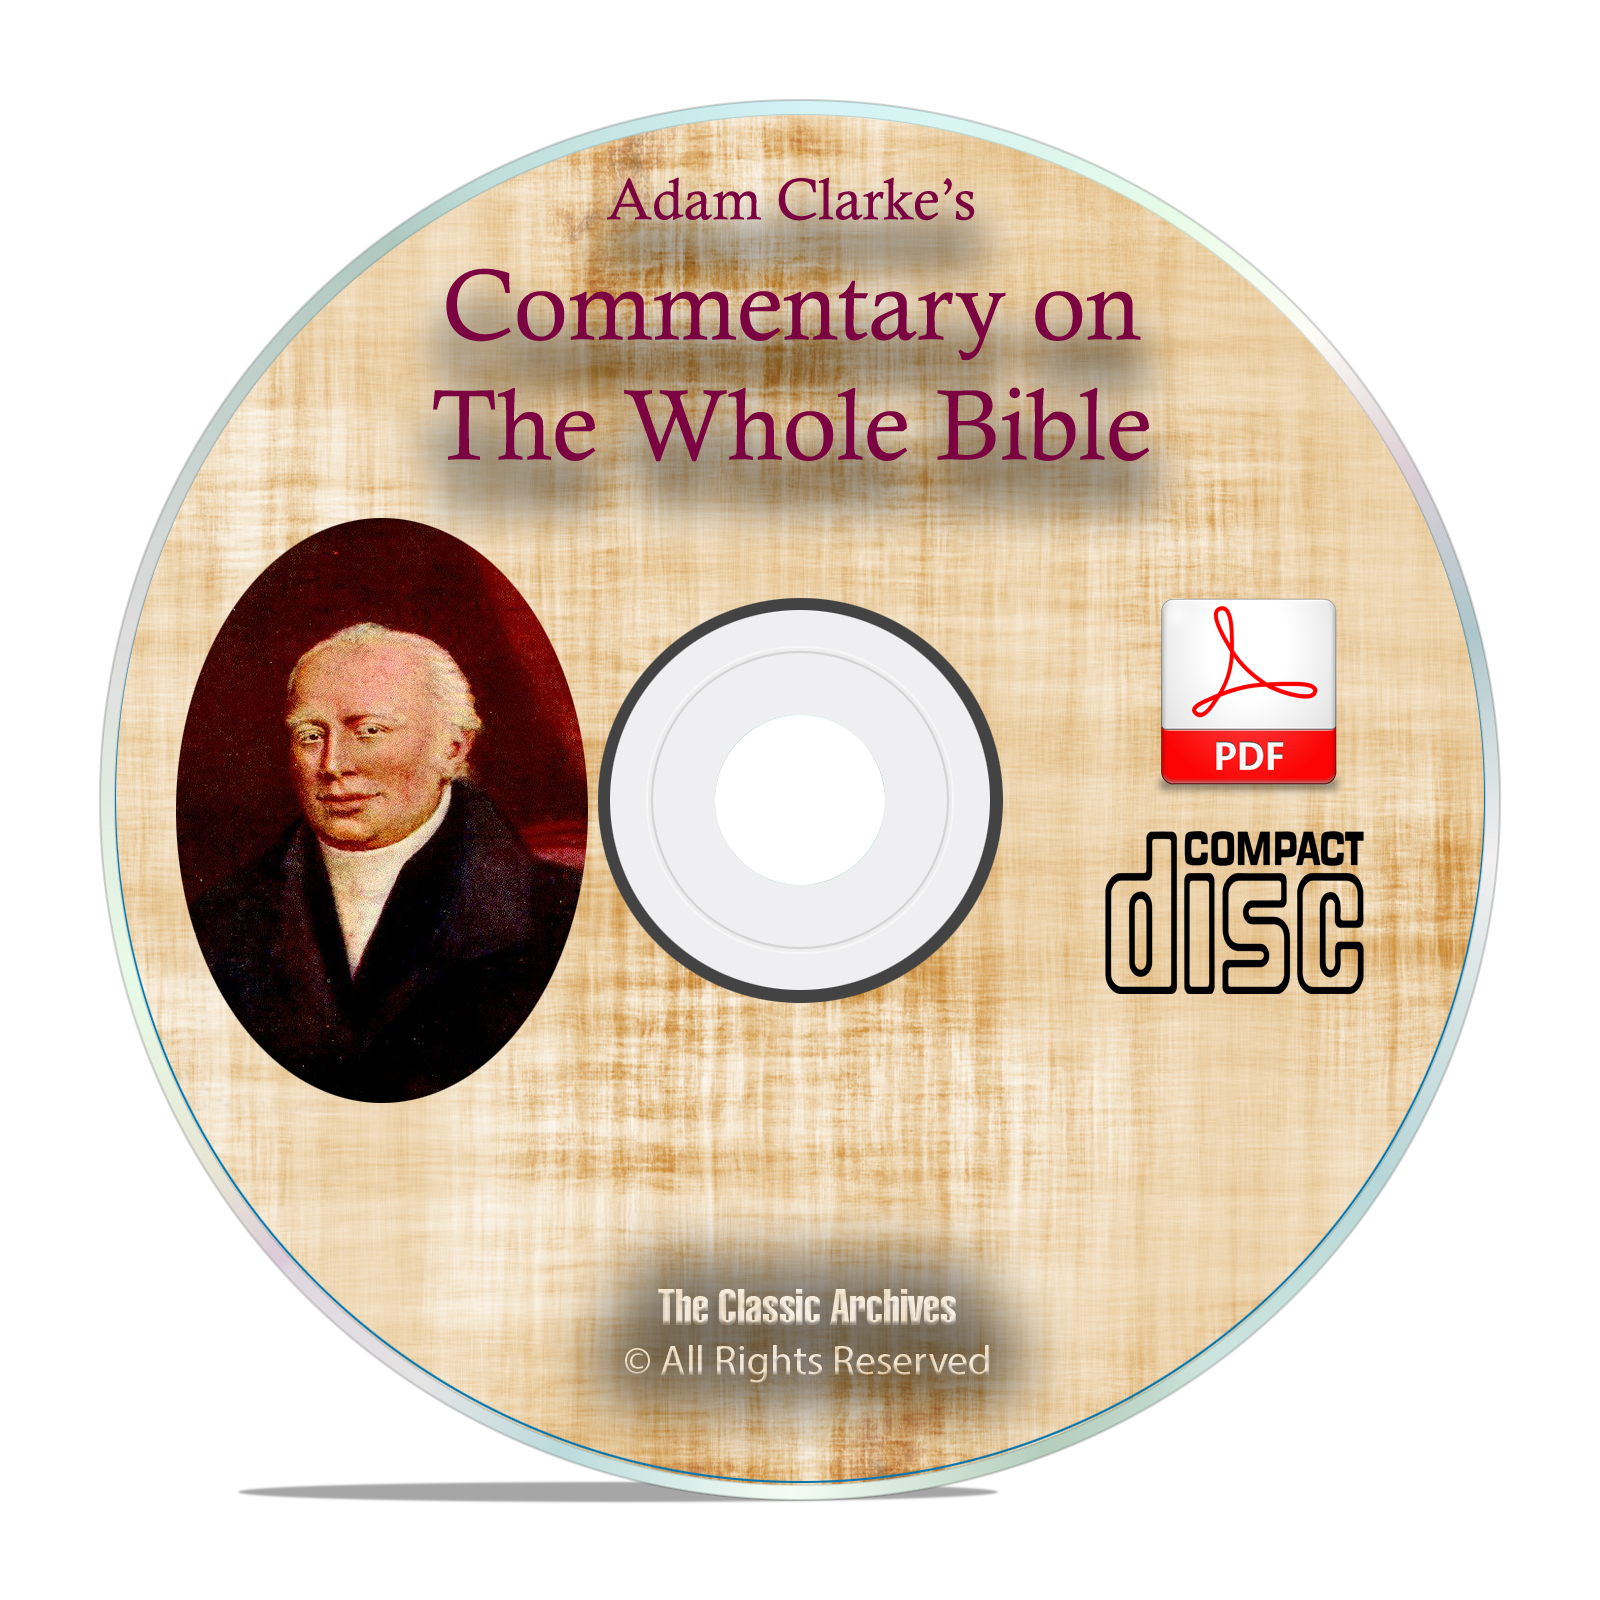 Adam Clarke's Commentary on Whole Bible, Christian Scripture Study PDF CD